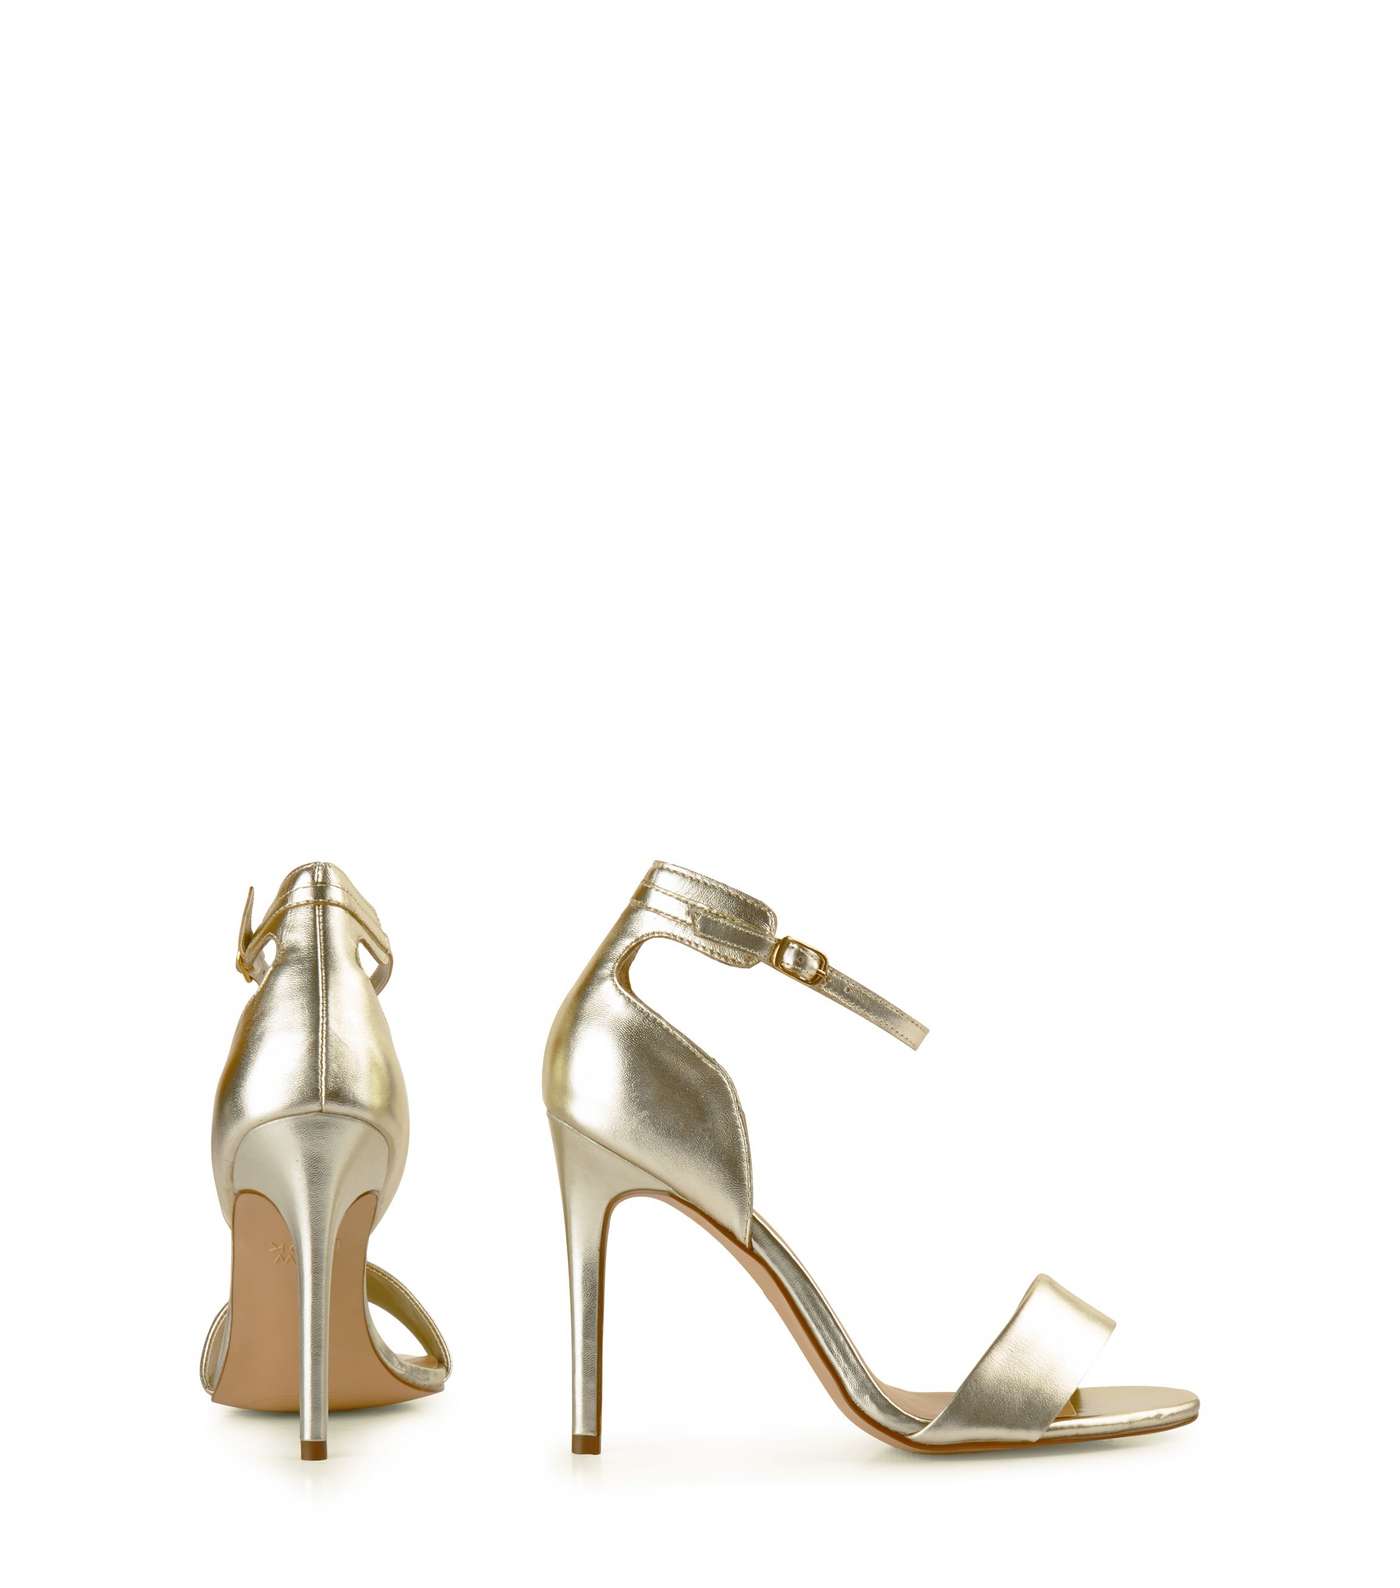 Gold Metallic Leather Ankle Strap Heels Image 4